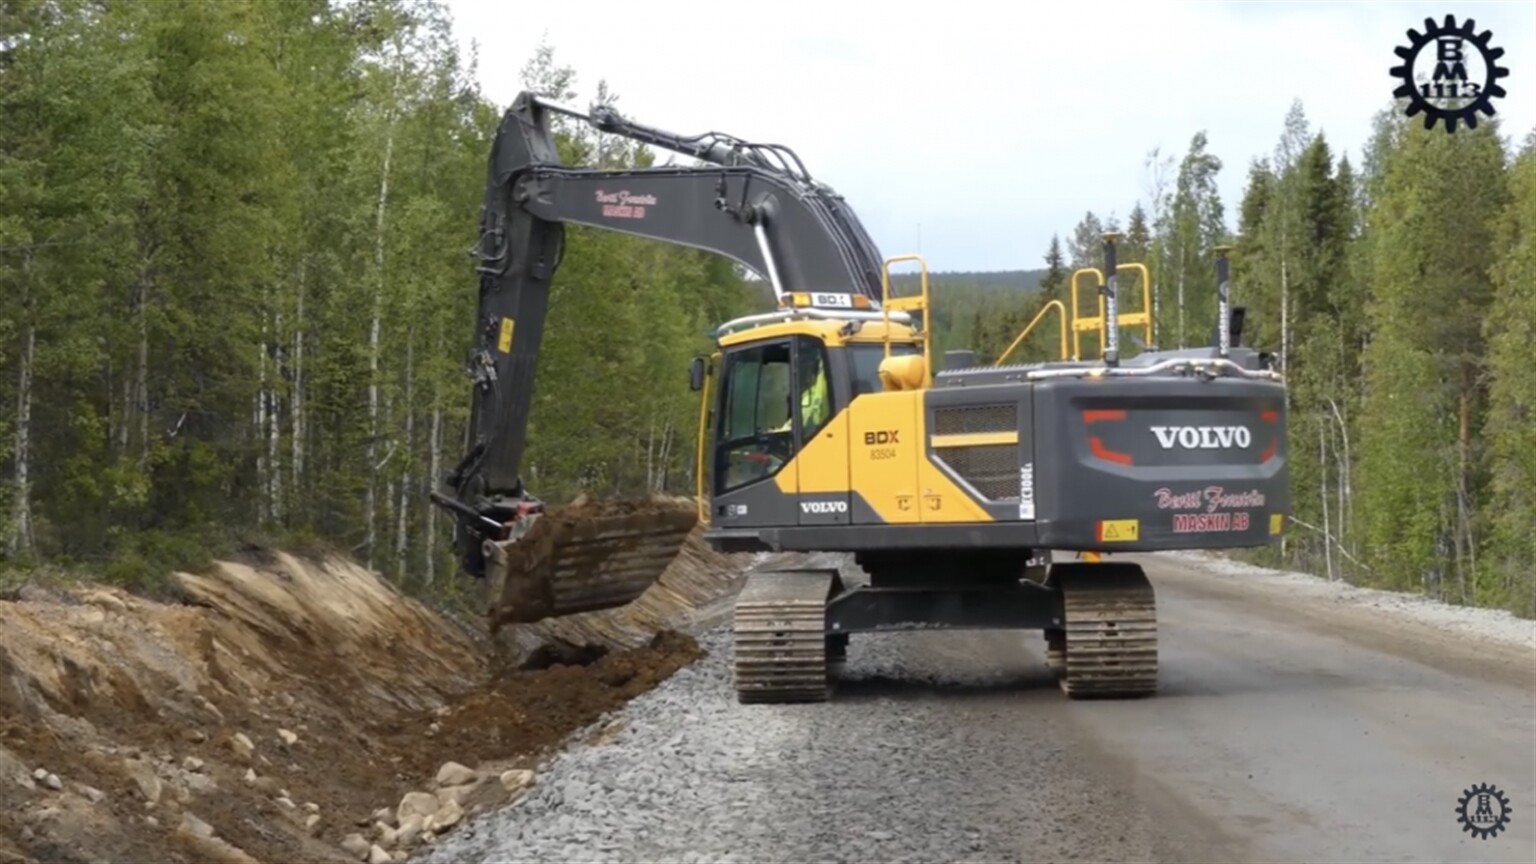 Volvo and Rototilt in a native setting